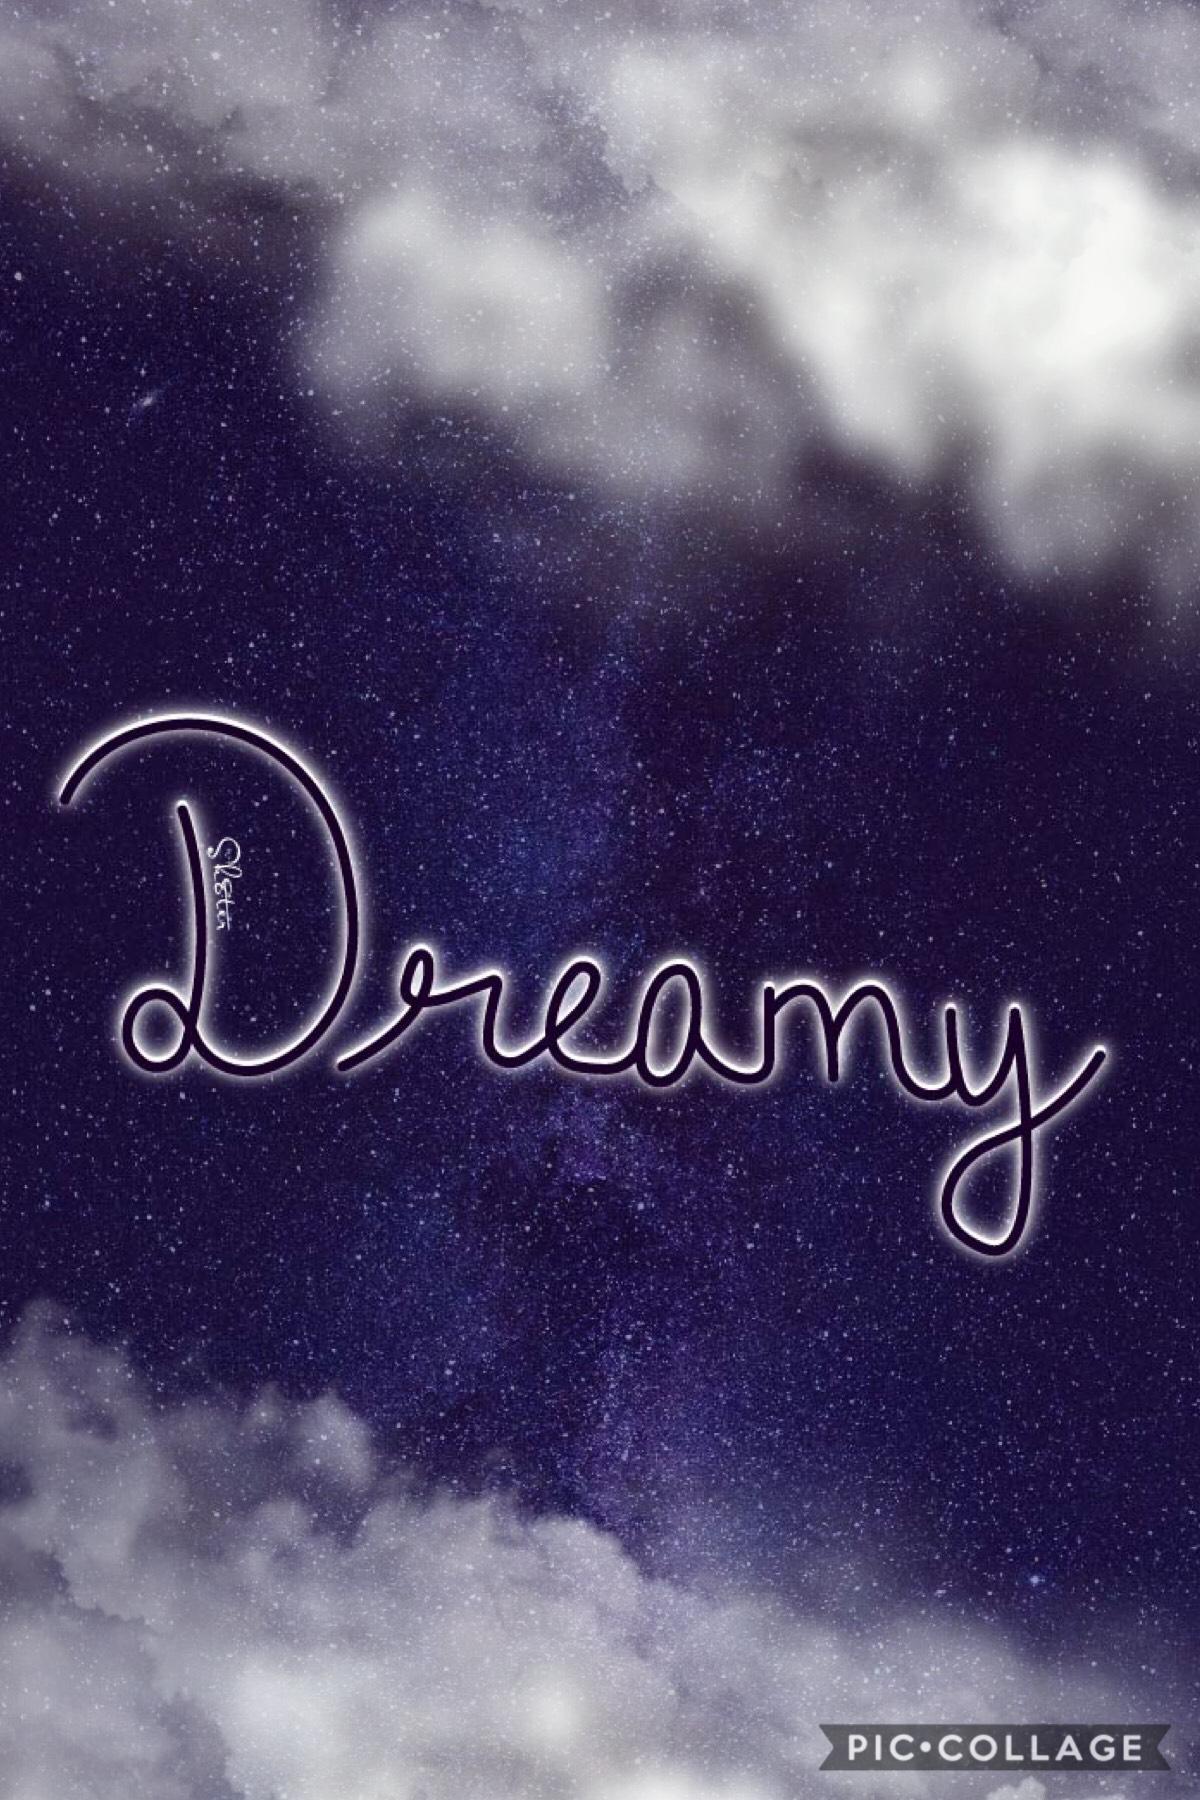 My hand lettering :) Dreamy🌙✨💜 #dream #handwriting #stars #quickpost #dreamy #clouds